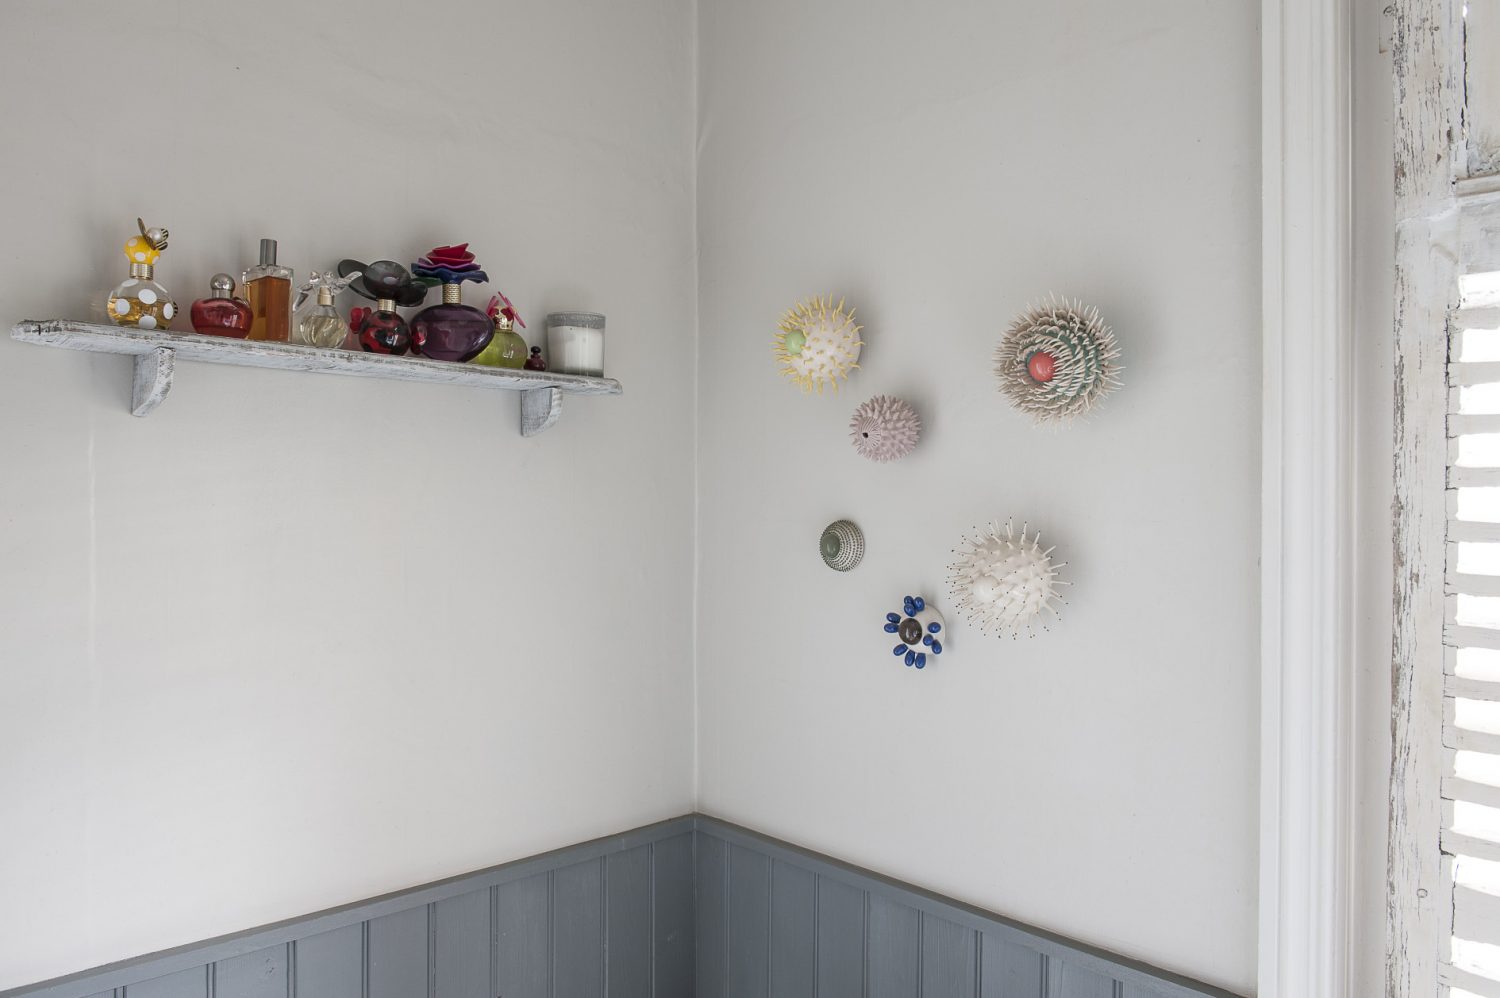 A grouping of spiky ceramic sculptures, reminiscent of sea anemones, from Myung Nam An are mounted on one wall